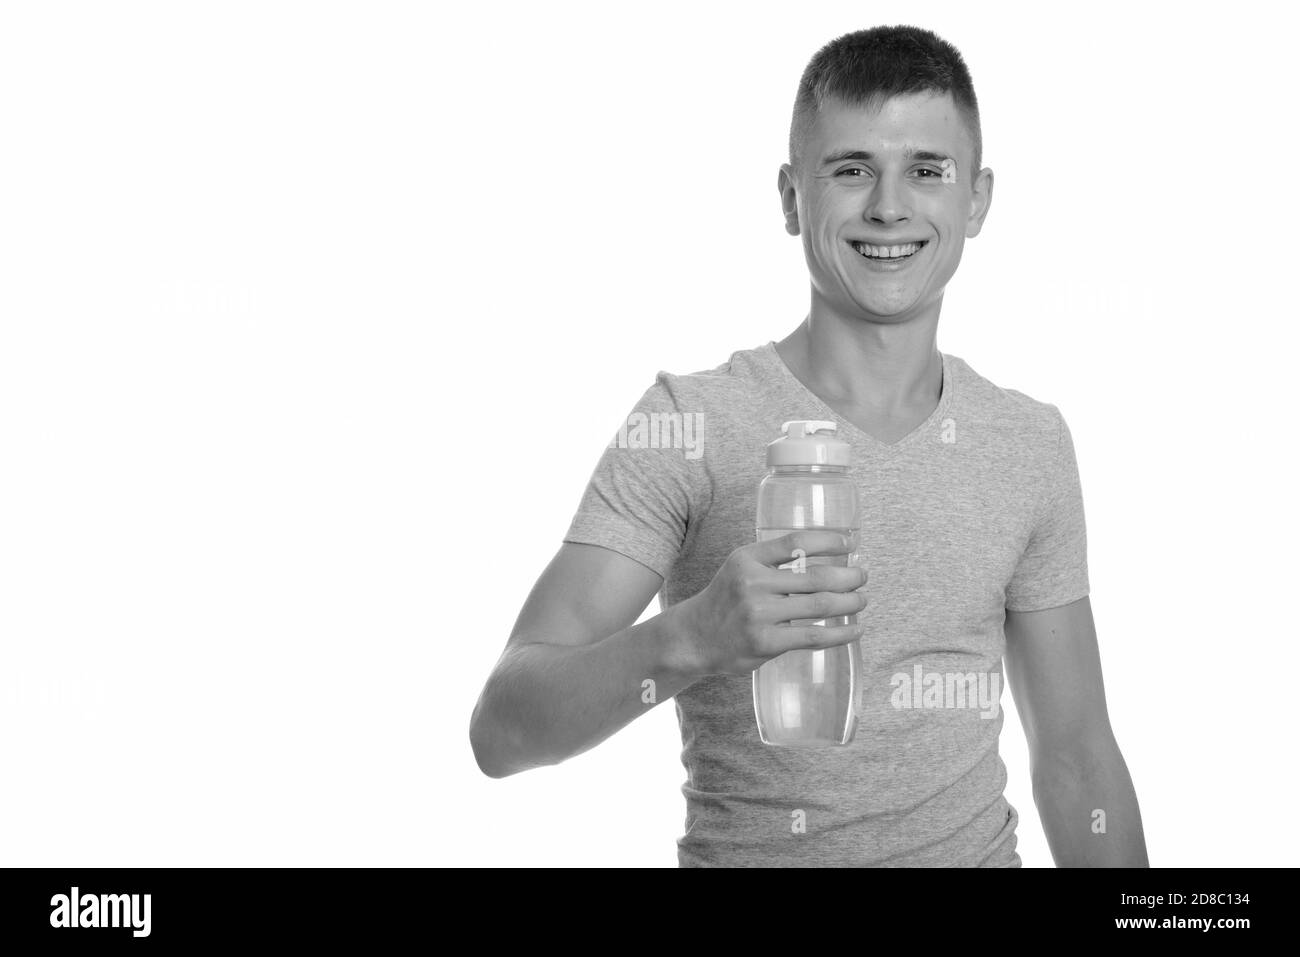 Young happy man smiling and holding water bottle Banque D'Images